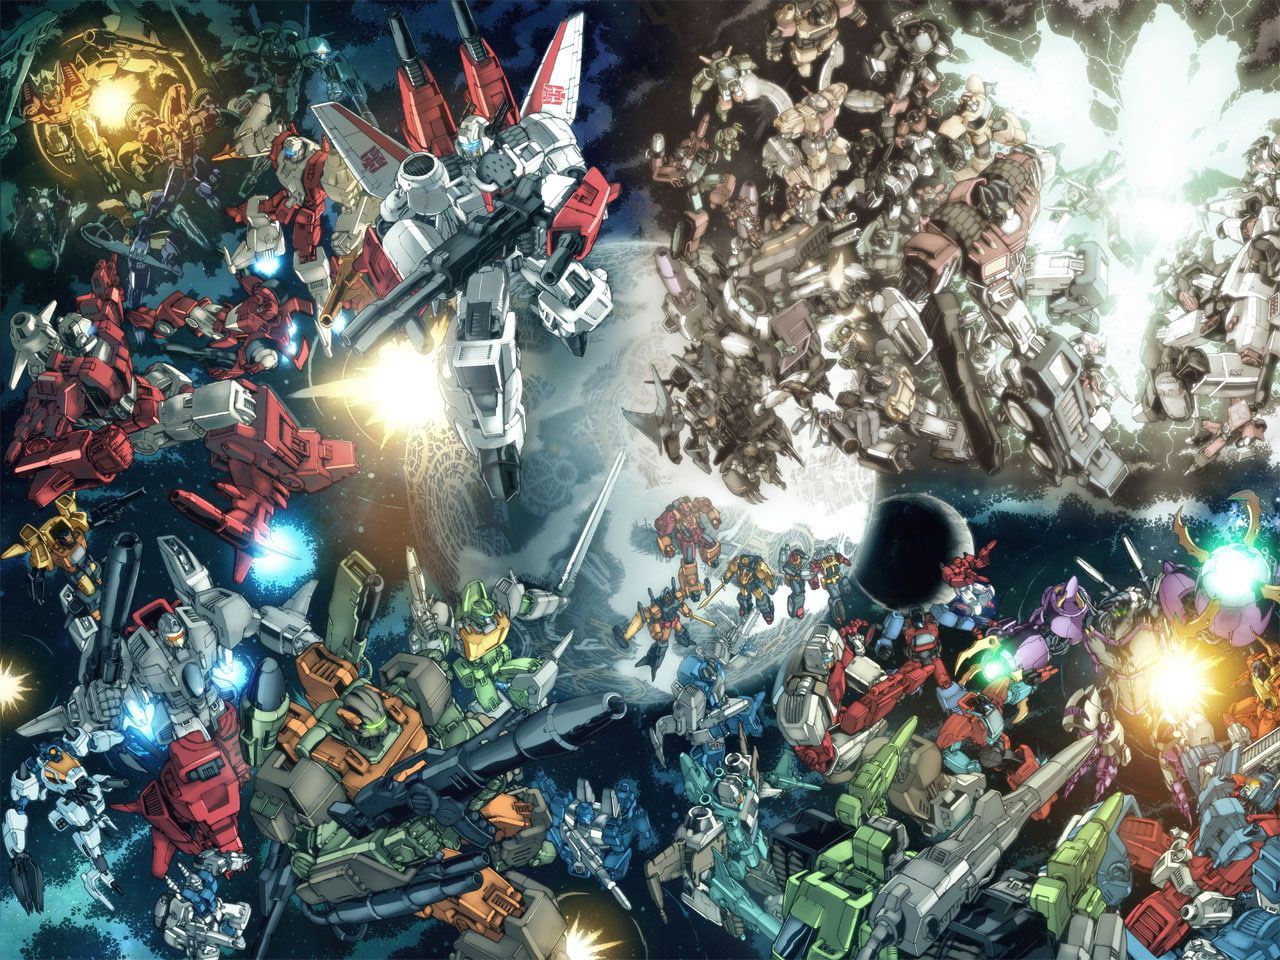 Transformers Idw Wallpapers